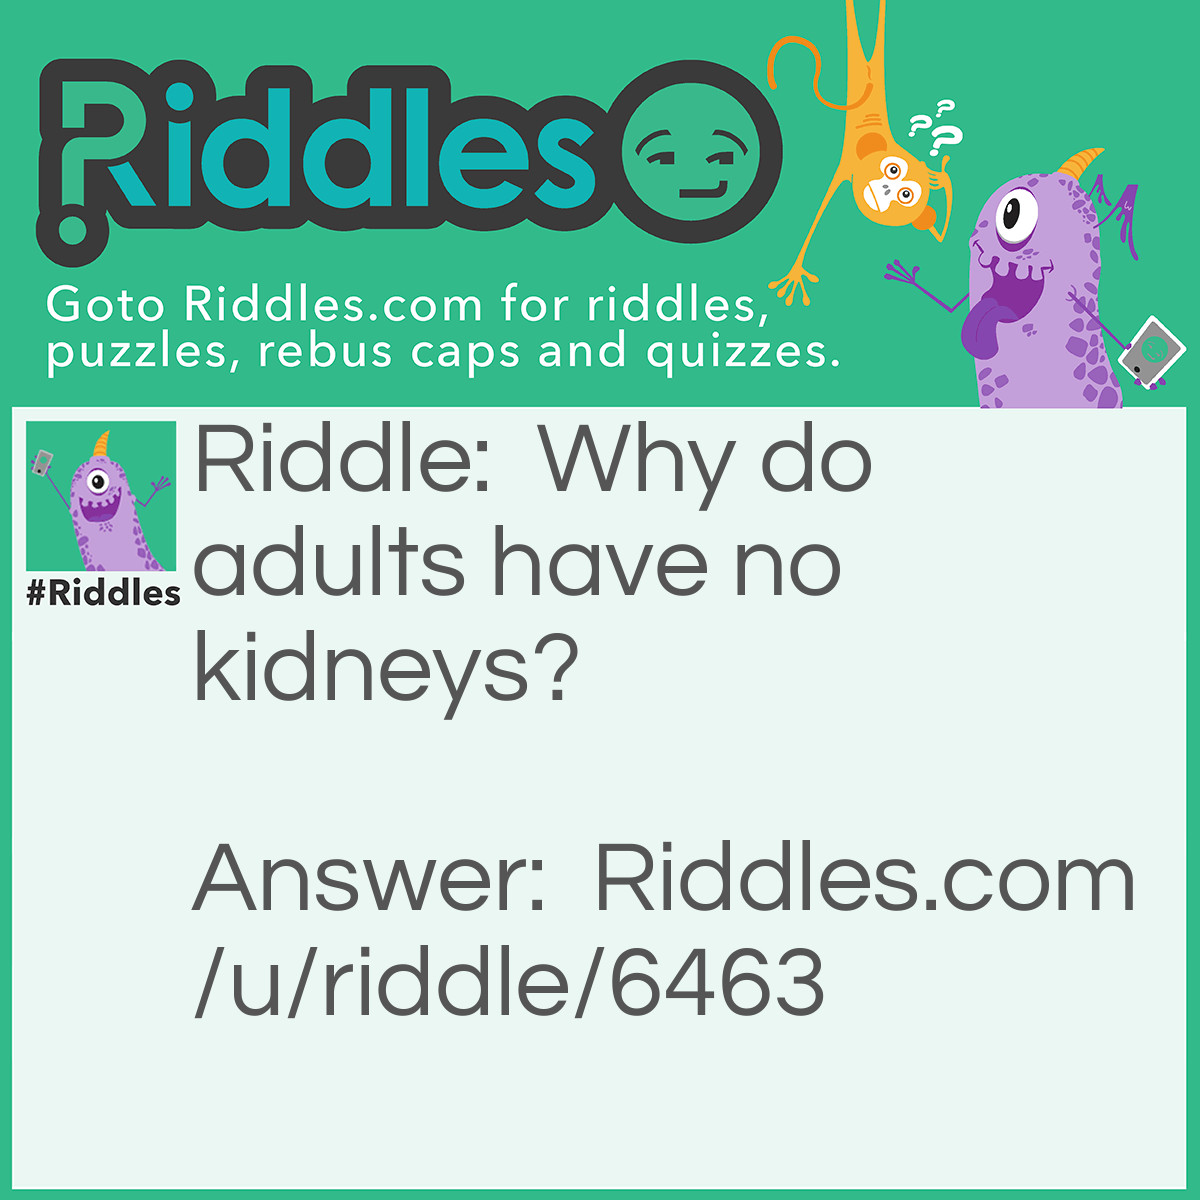 Riddle: Why do adults have no kidneys? Answer: Because their kidneys have grown up into adultneys!